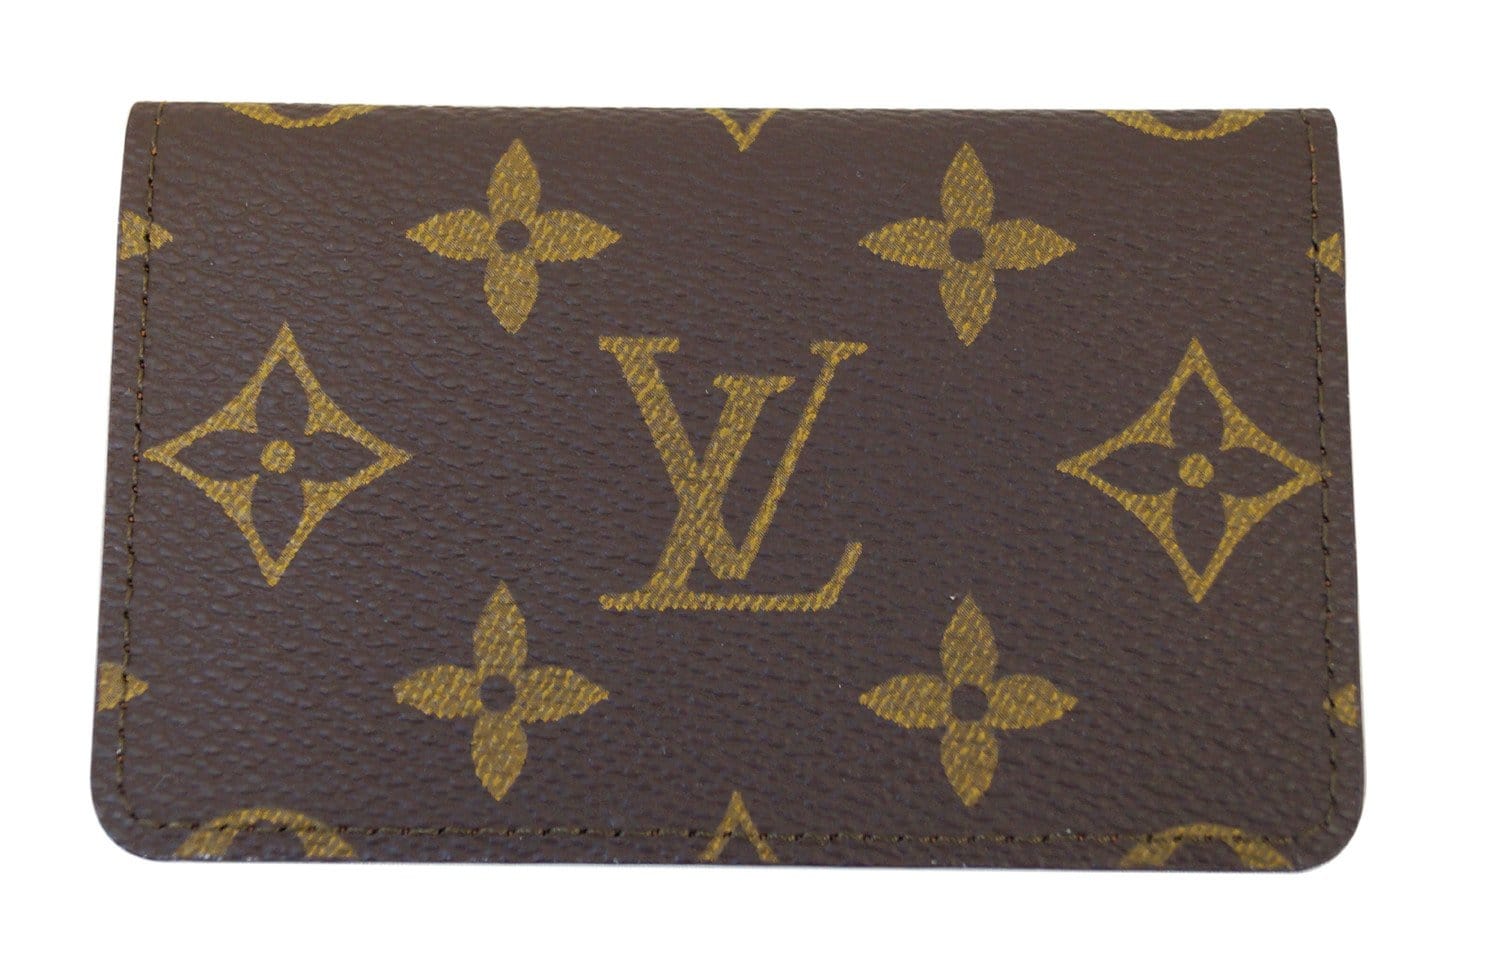 Authentic Louis Vuitton Monogram Canvas Business Card and Credit Card